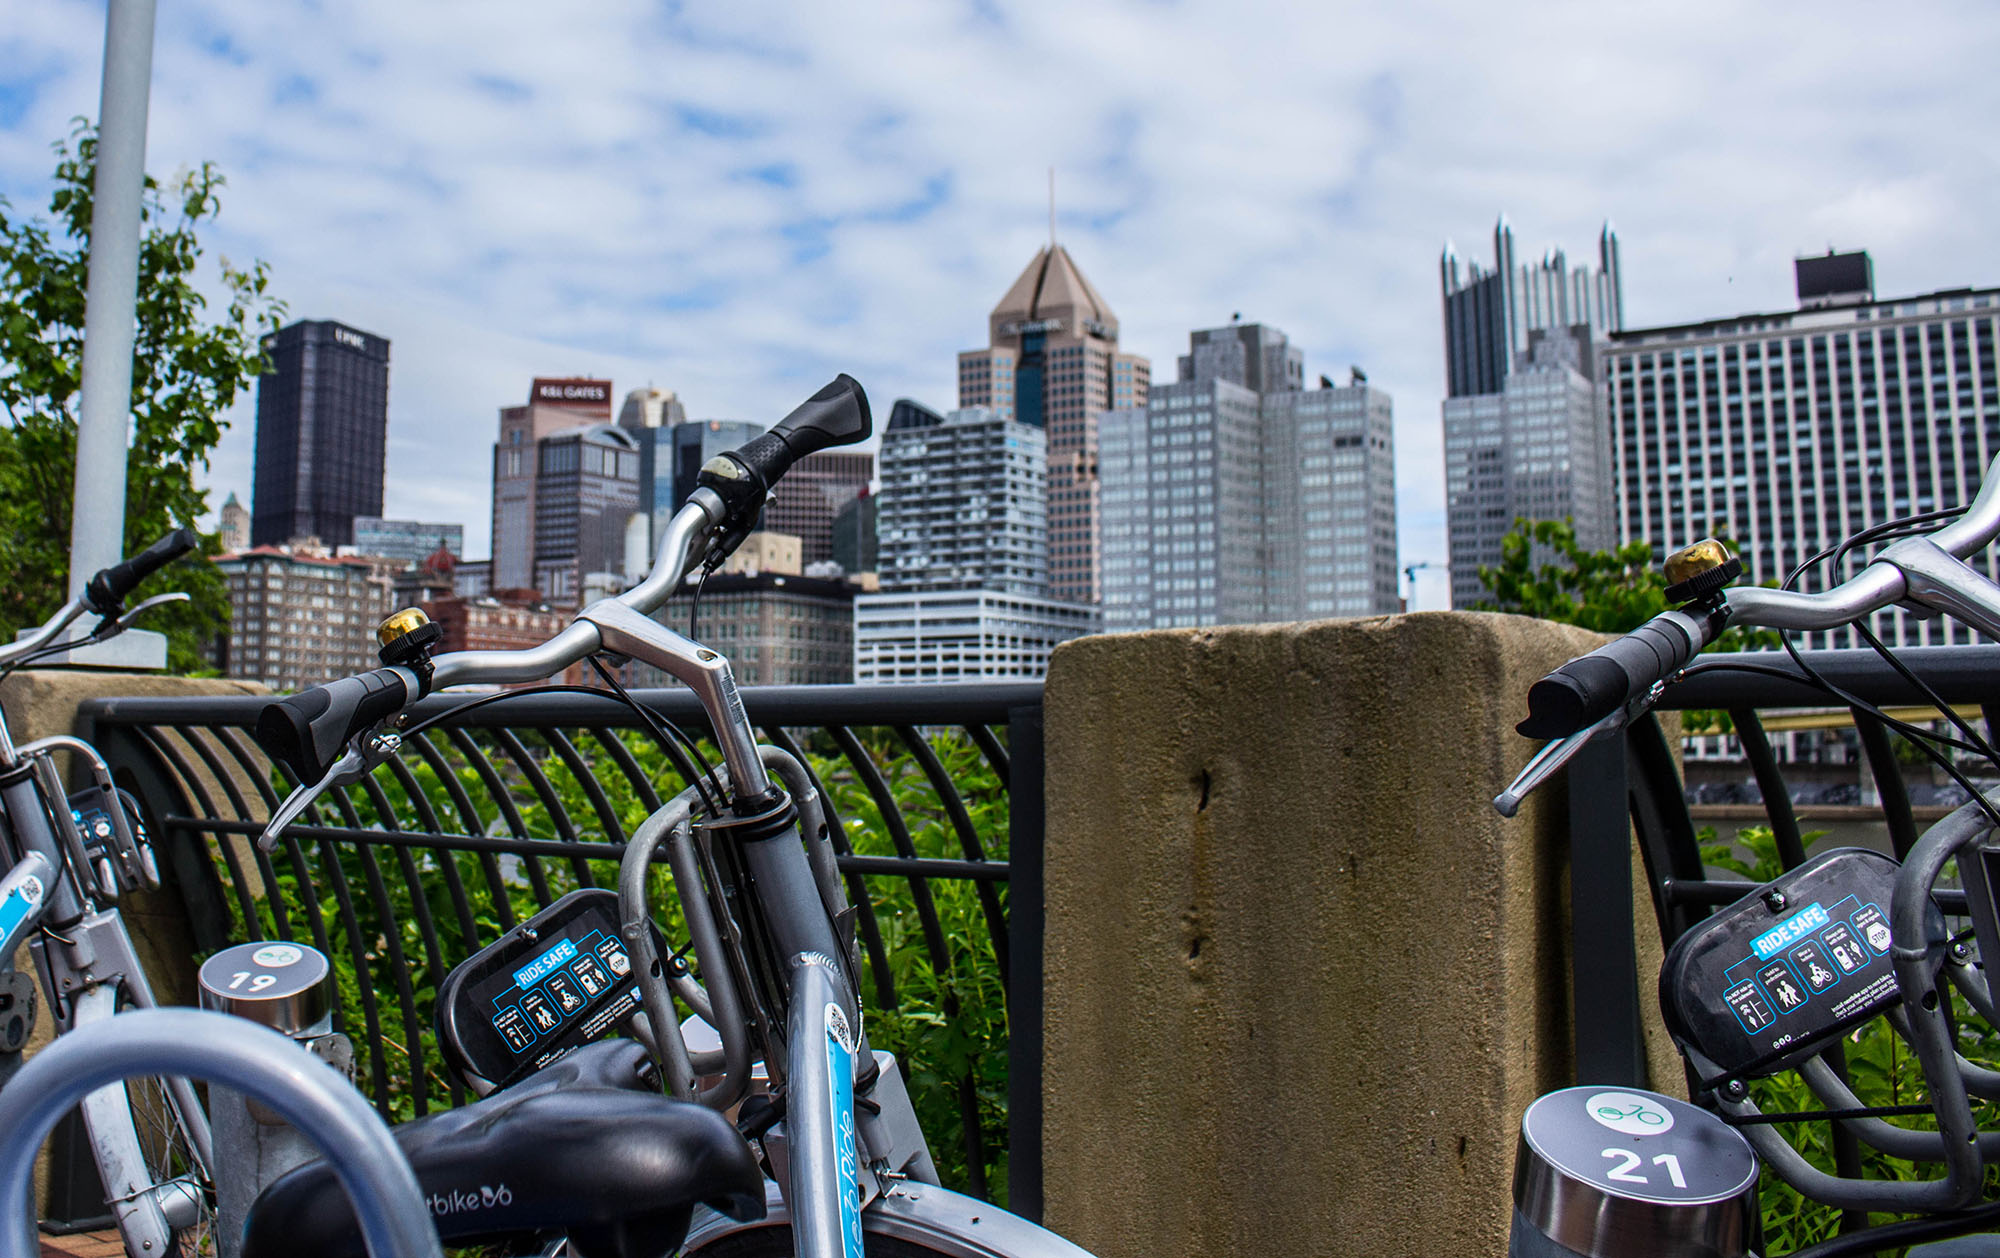 Pictured are bikes and a view of Pittsburgh. Photo by Annie Brewer.